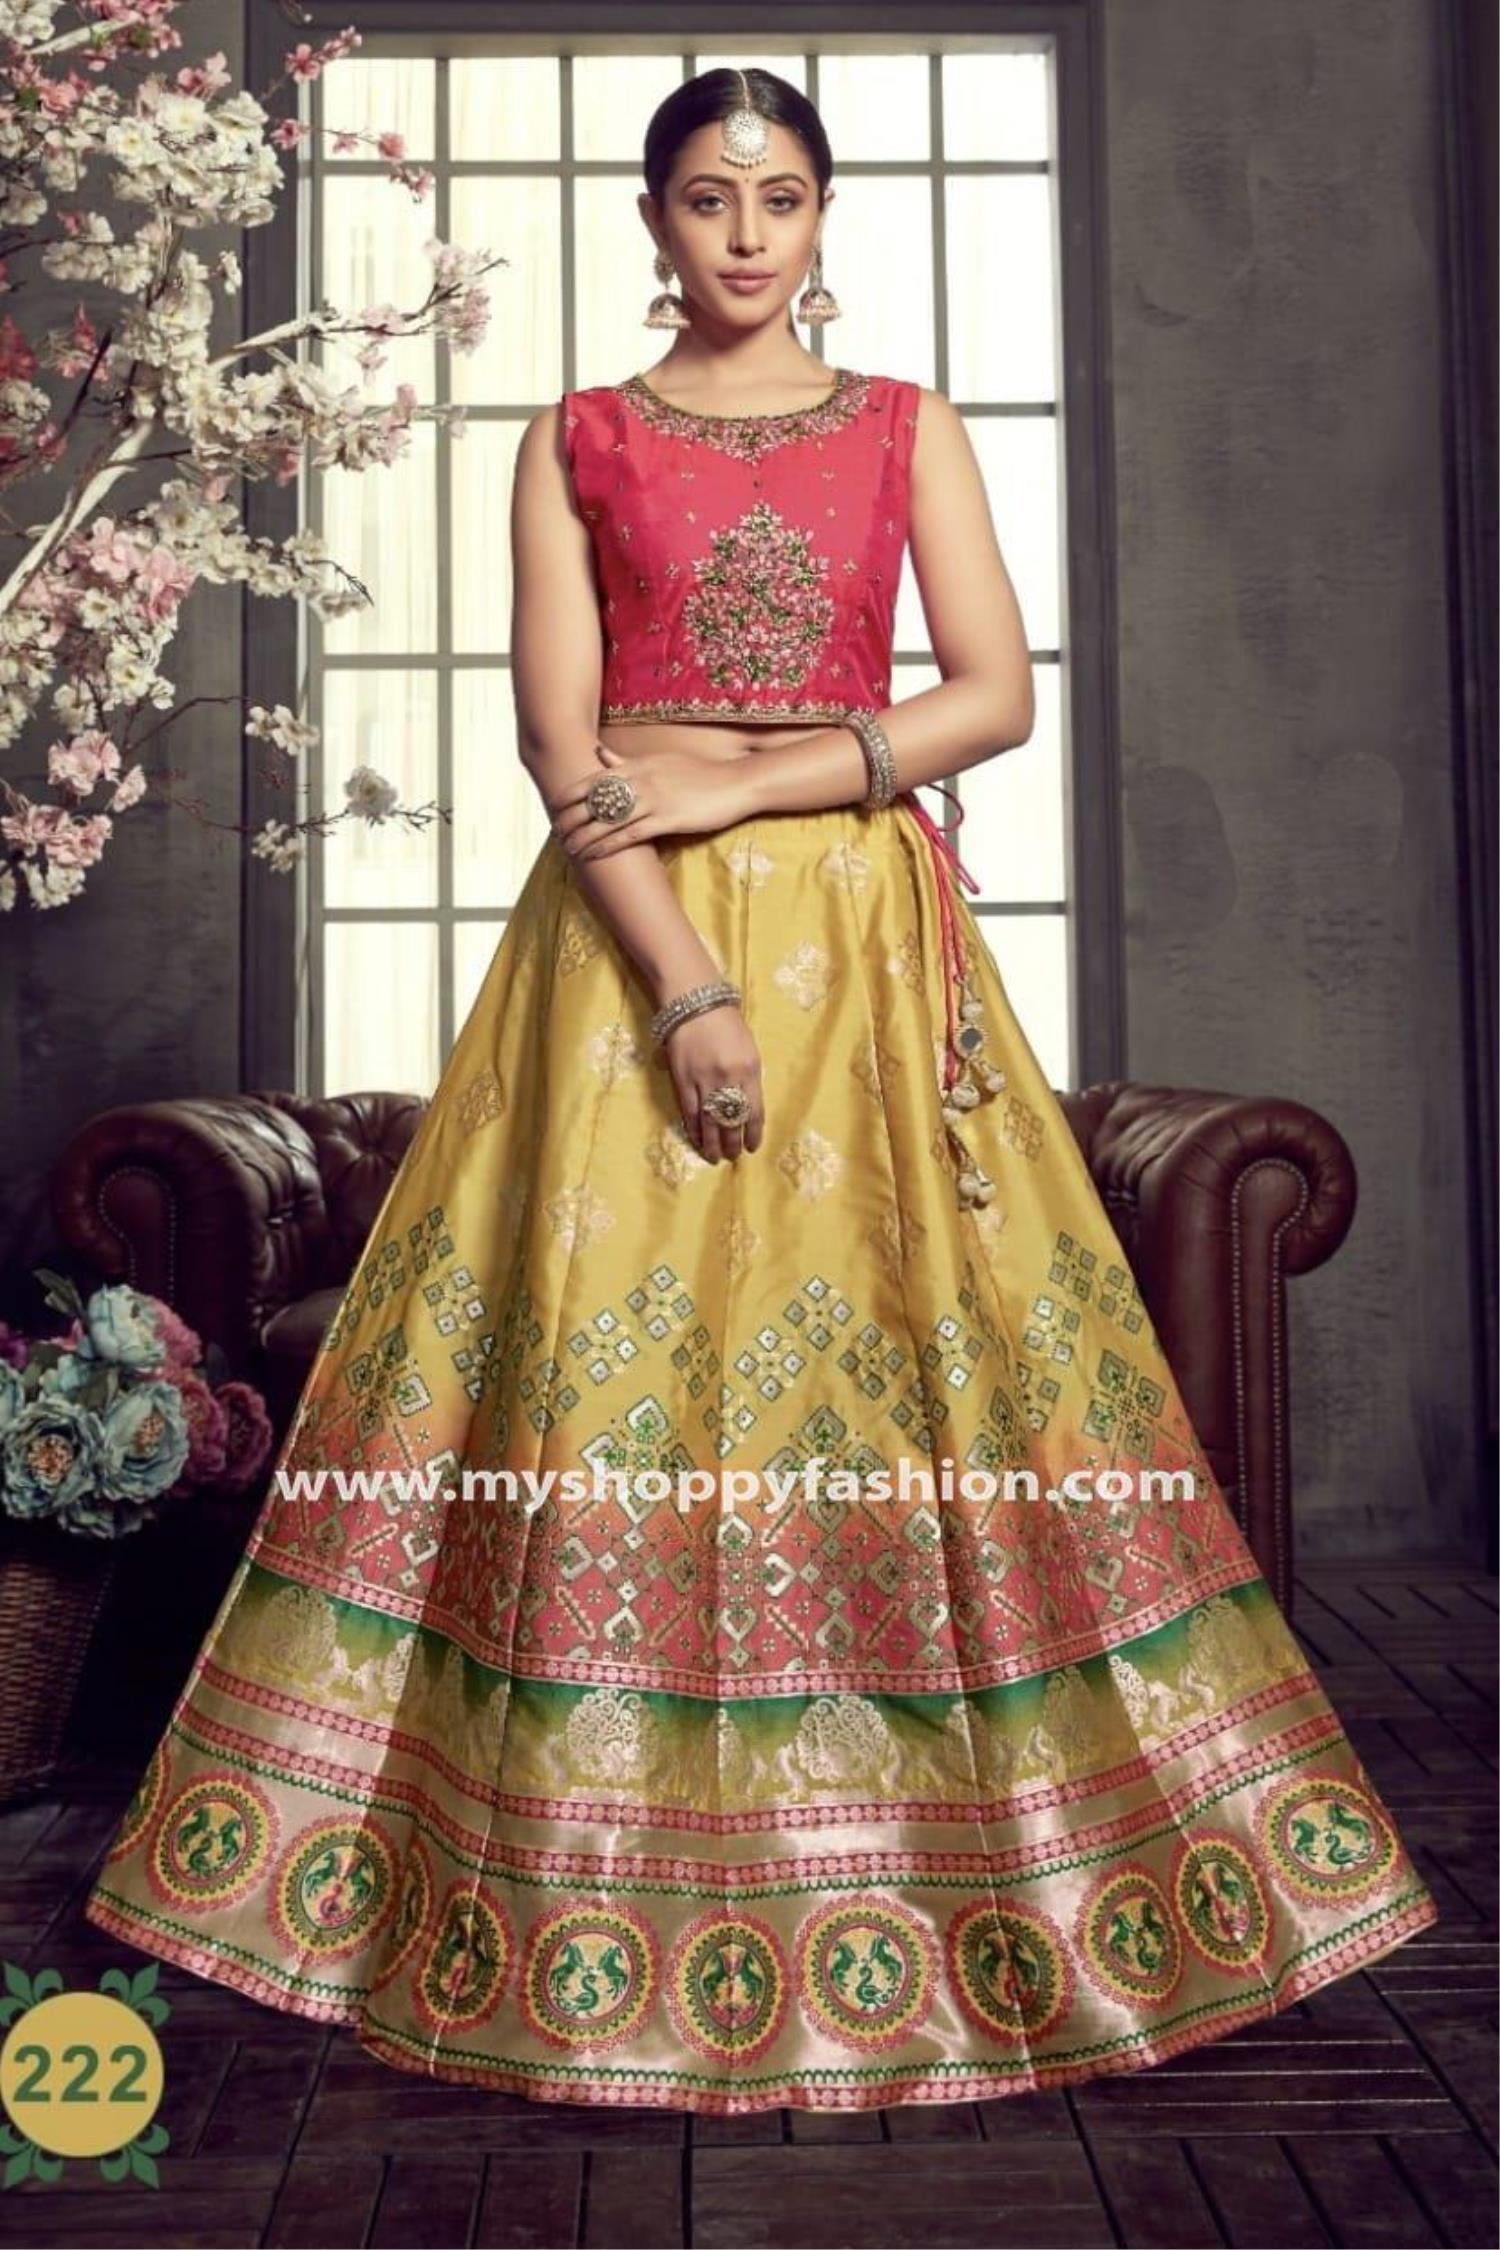 RE - Yellow Colored Georgette Frill Lehenga Choli - New In - Indian